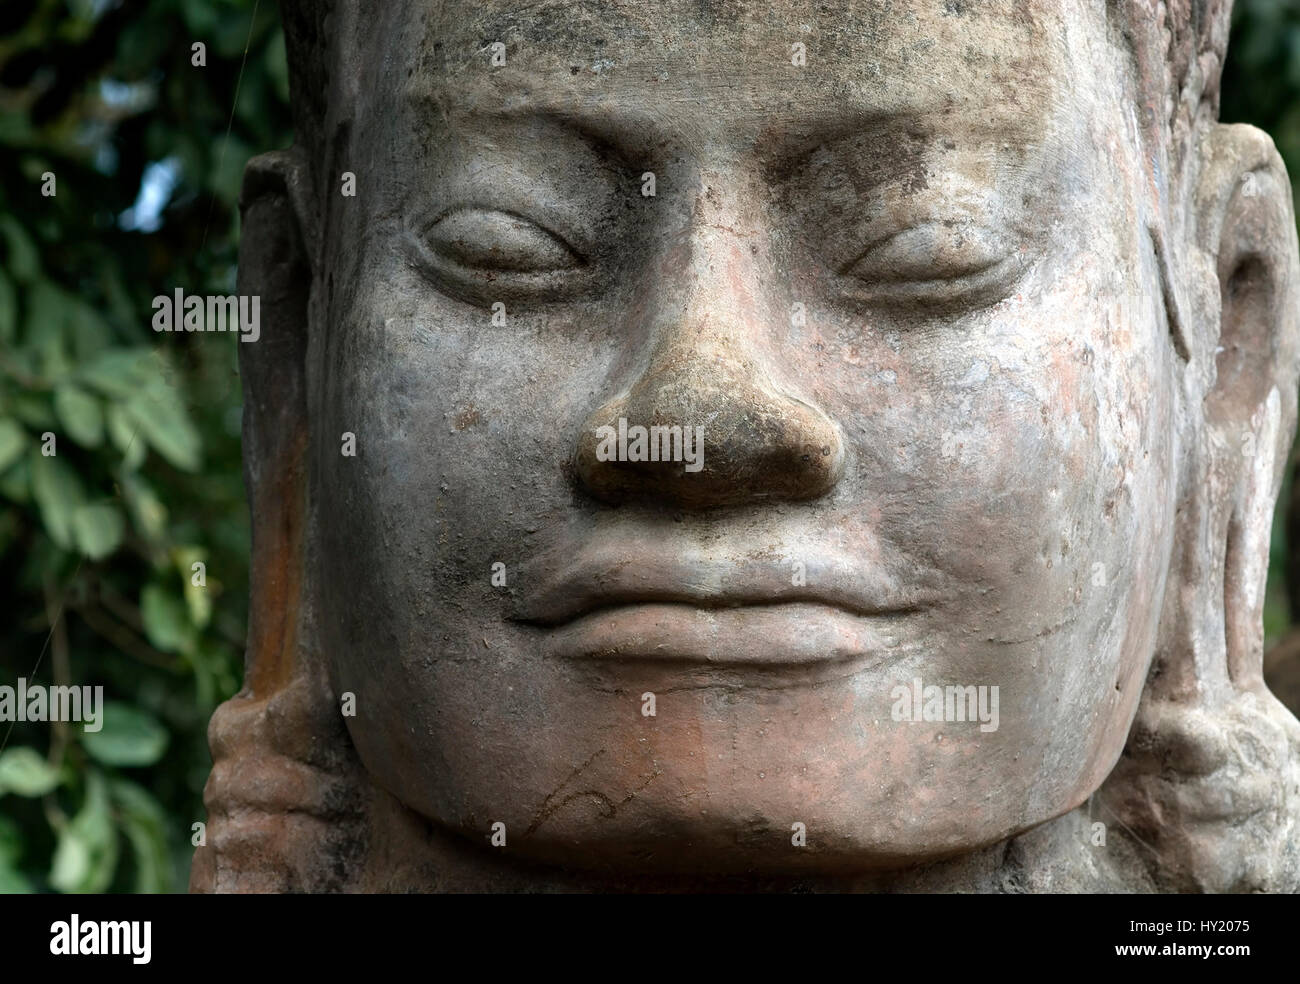 This stock photo shows a close up of a temple stone sculpture at the famous Angkor Wat Temple near Siam Reap in Cambodia. The image shows the heads wi Stock Photo